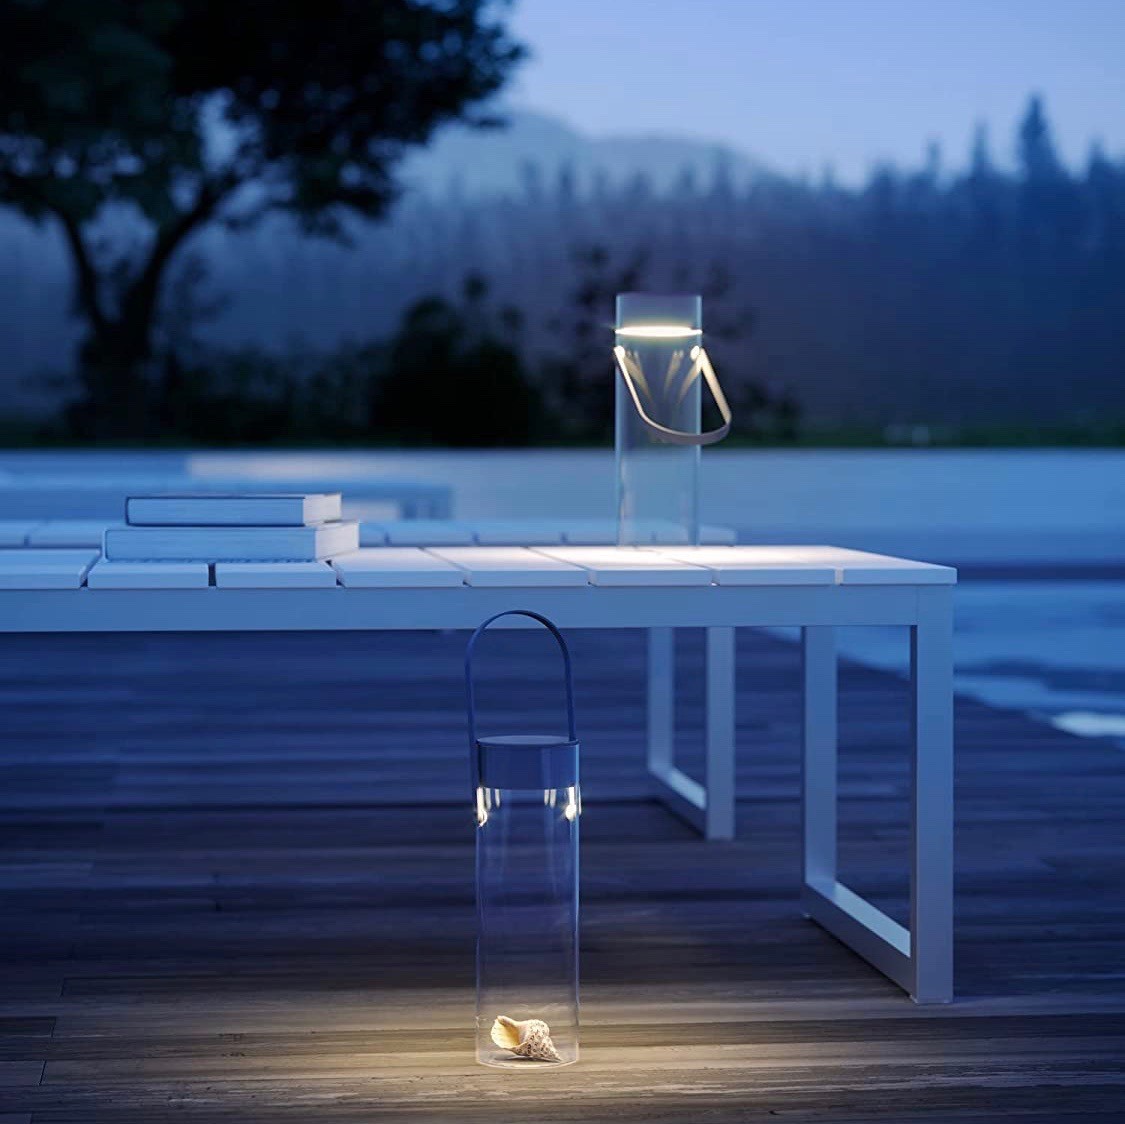 433,95 € Free Shipping | Outdoor lamp Aluminum and glass. White Color